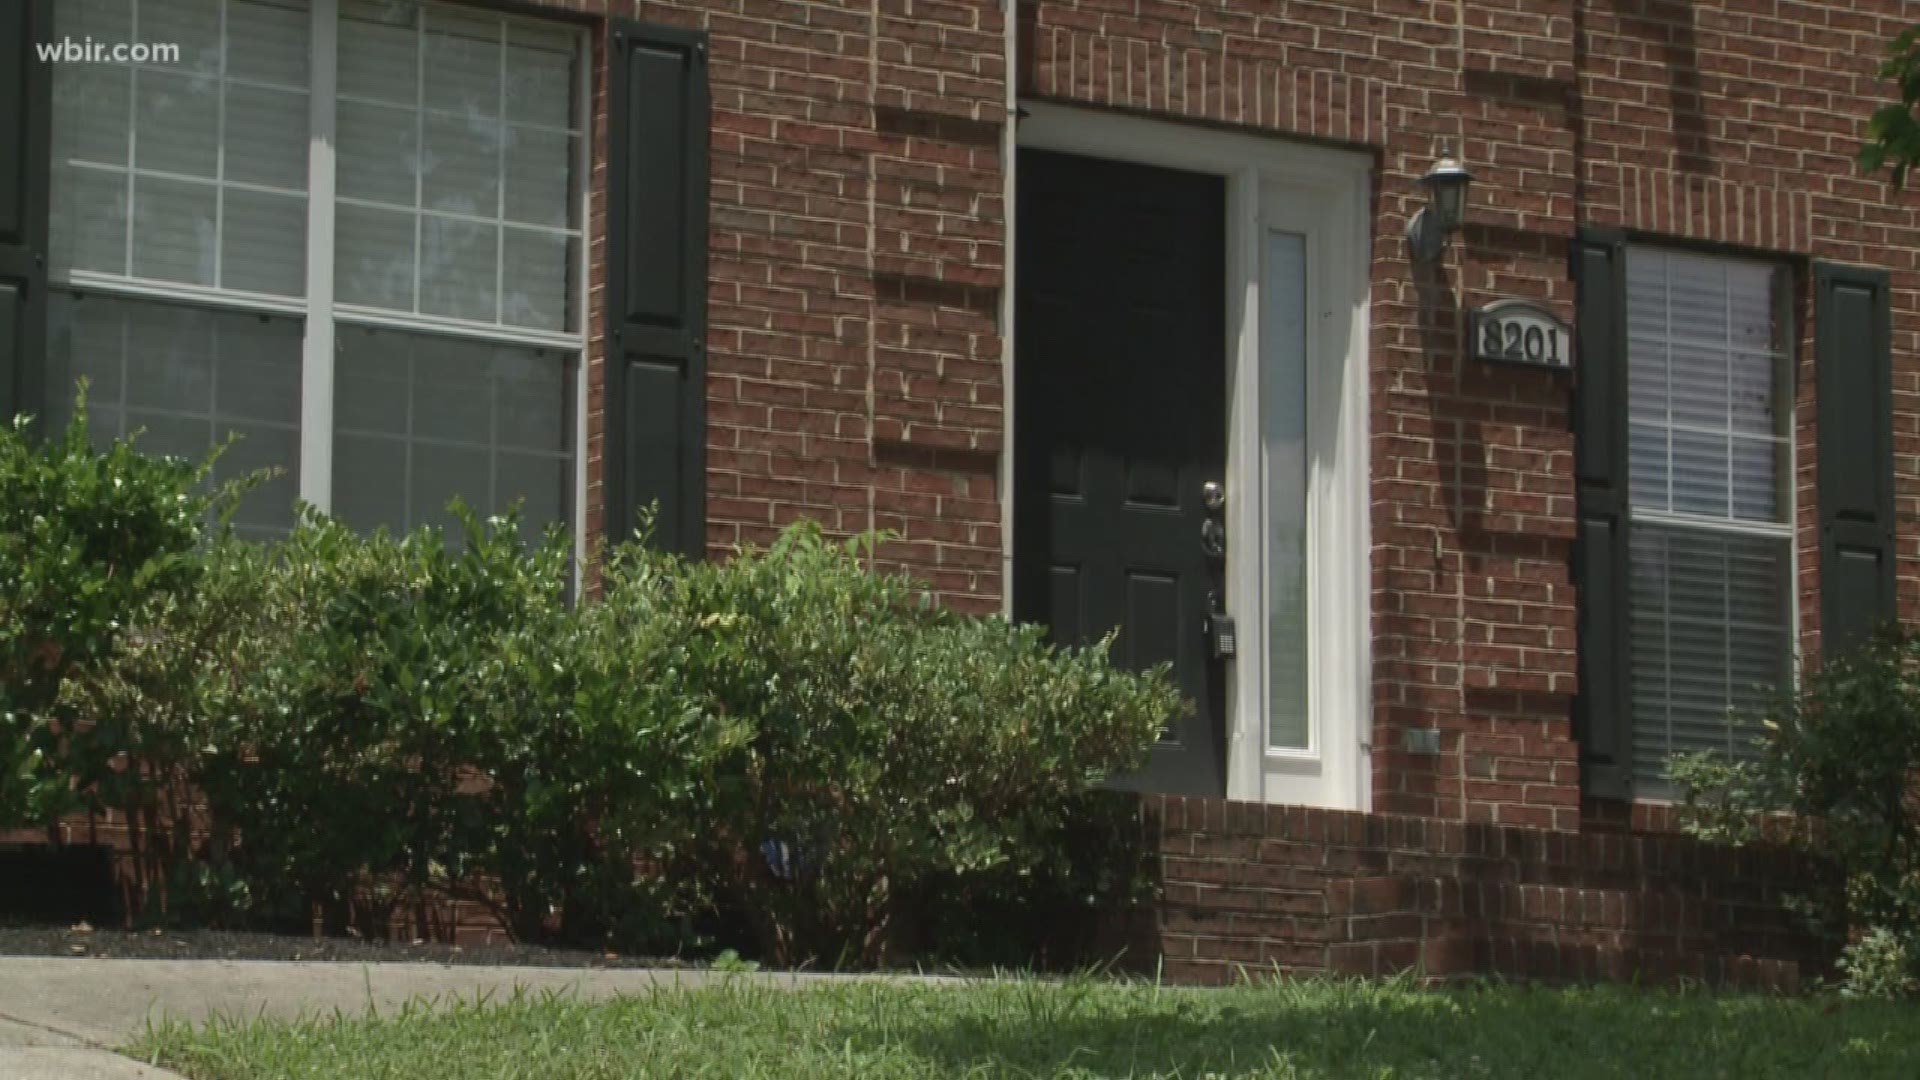 A Connecticut family who moved to East Tennessee thought they had found the perfect rental home on Craigslist. It turned out to be a costly scam.